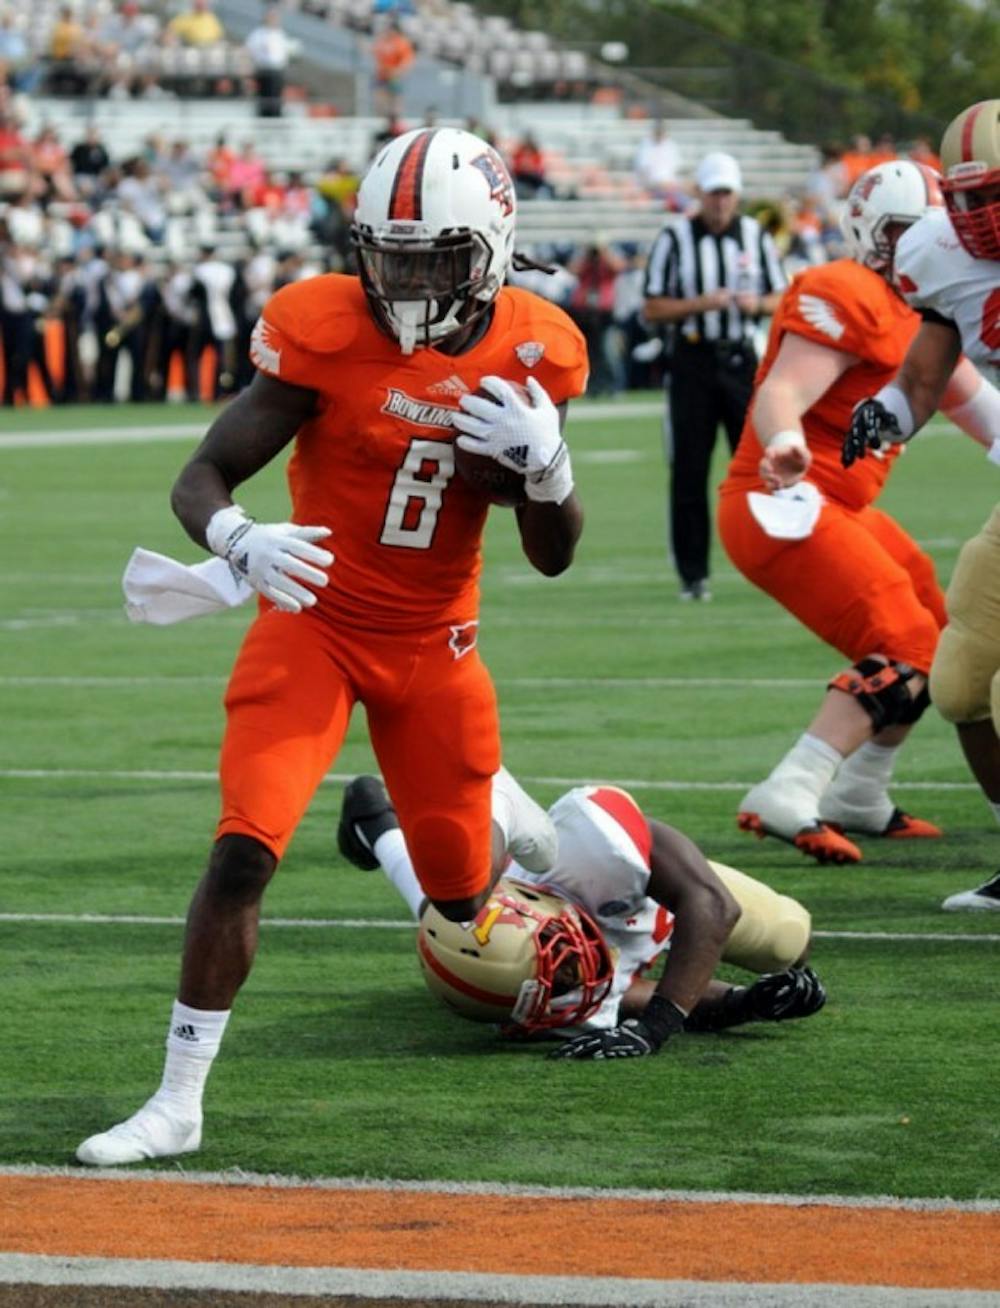 Falcons&rsquo; junior running back Travis Greene
has ran for 466 yards and six touchdowns
this season. The Bulls travel to Bowling Green to
face the Falcons Saturday.&nbsp;Courtesy of BGSU Athletics.